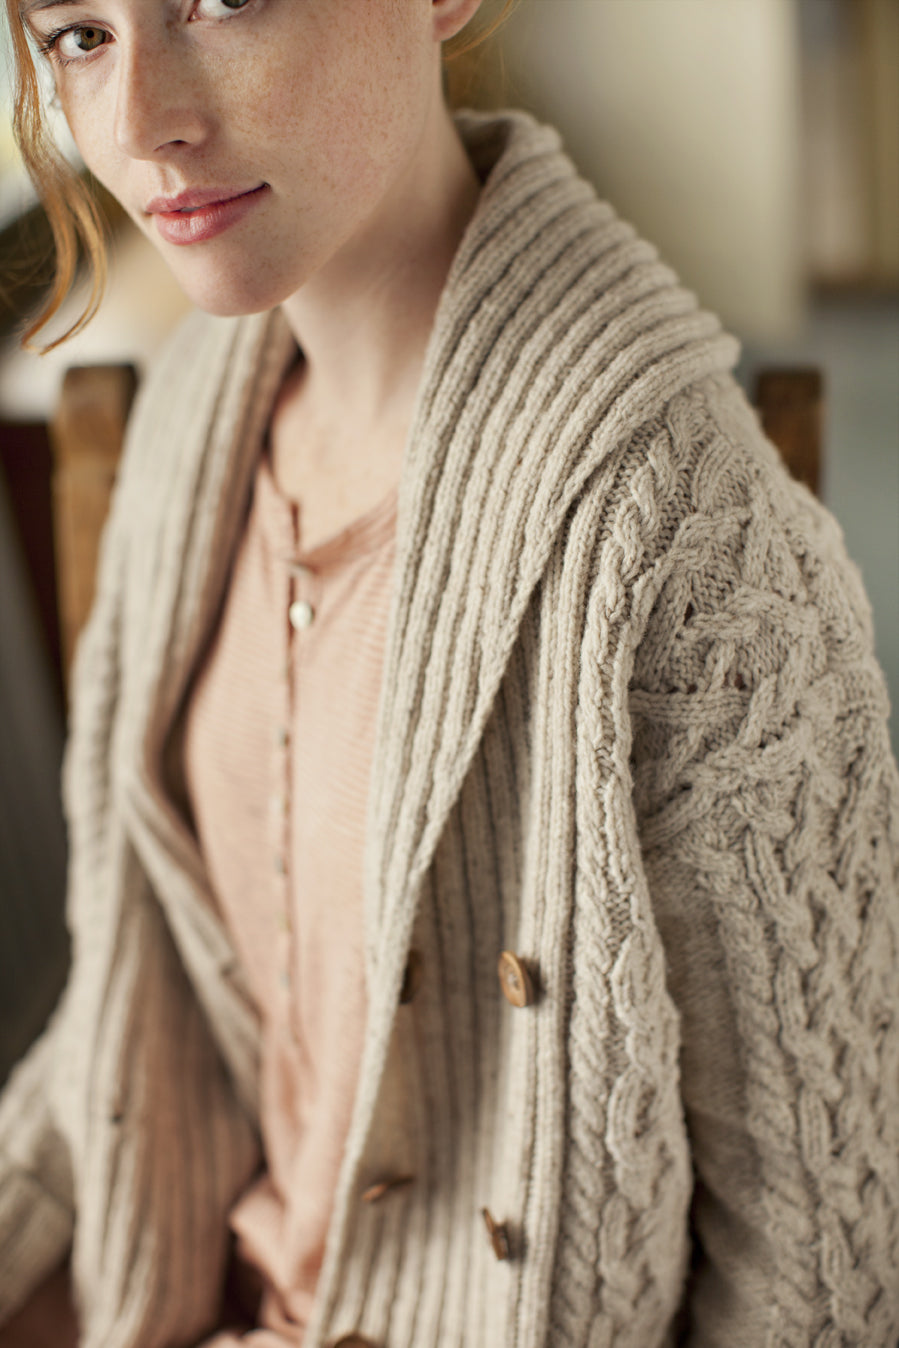 Exeter Cardigan, Knitting Pattern by Michele Wang